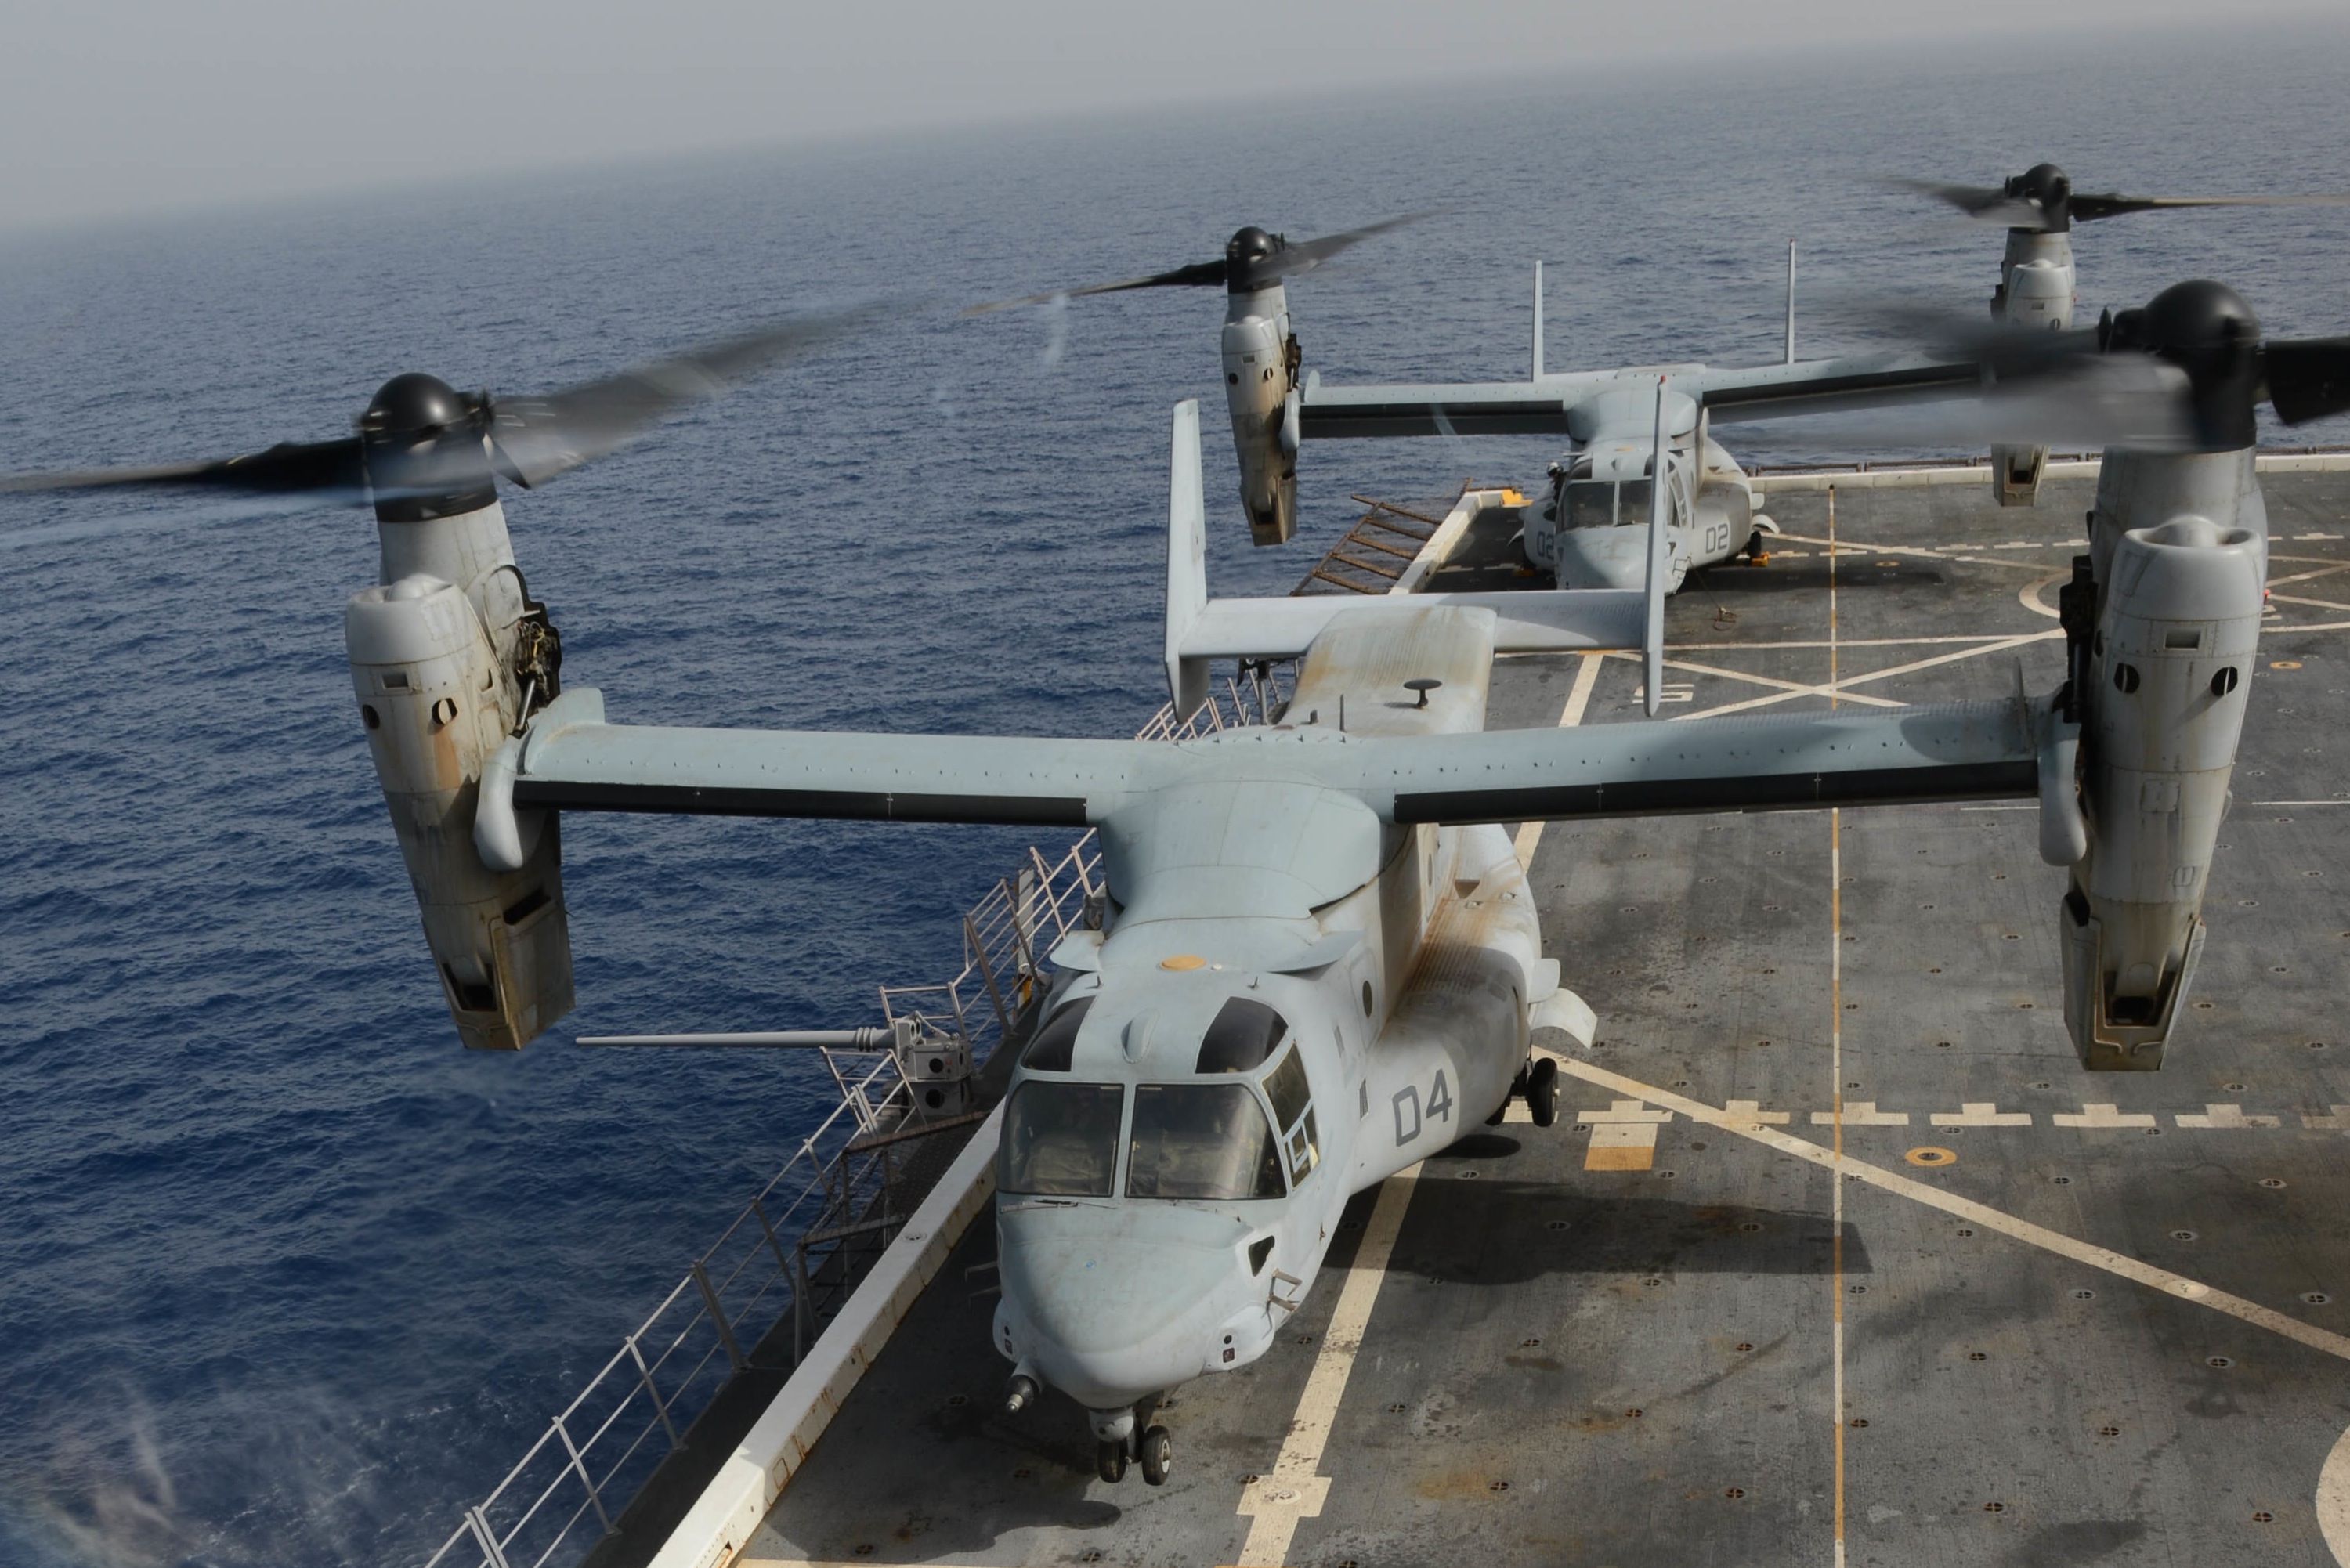 V-22s shown aboard the USS Mesa Verde. The ship sailed into the Persian Gulf on Monday, where its tilt-rotor aircraft could used be used to rescue U.S. diplomats in extremis in Baghdad. (MC2 Shannon M. Smith / Navy photo)